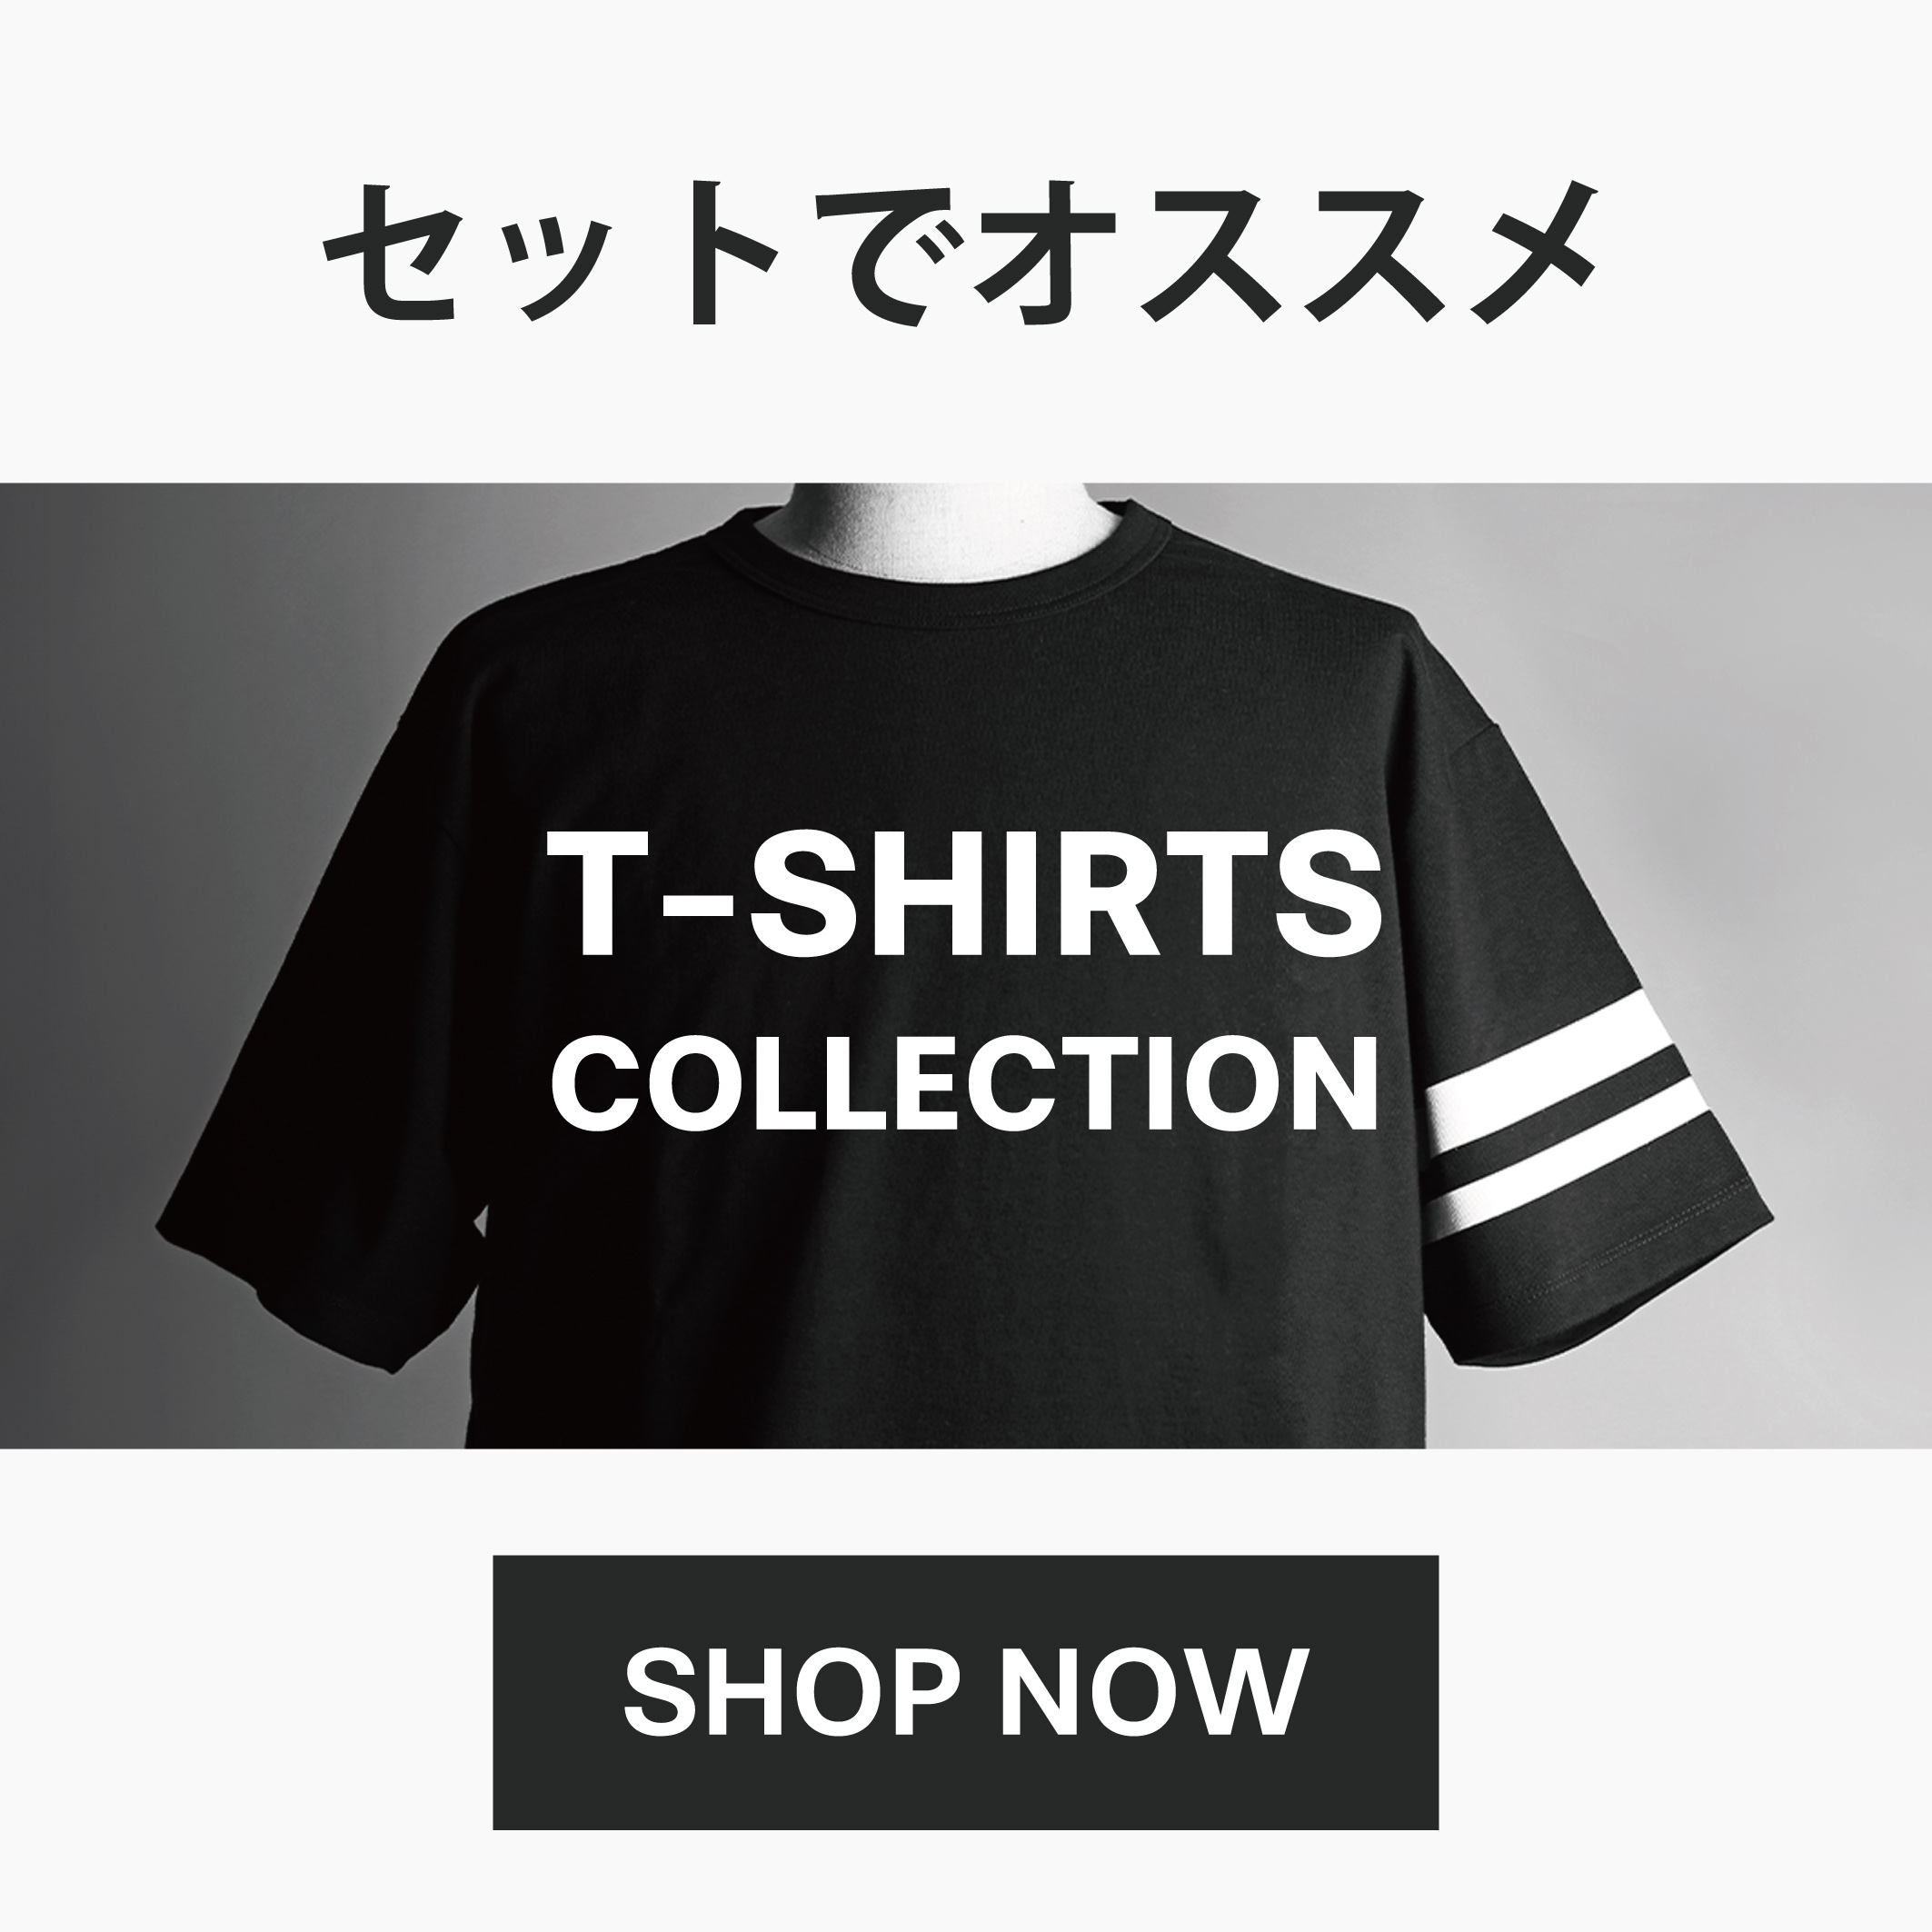 tshirs_collection